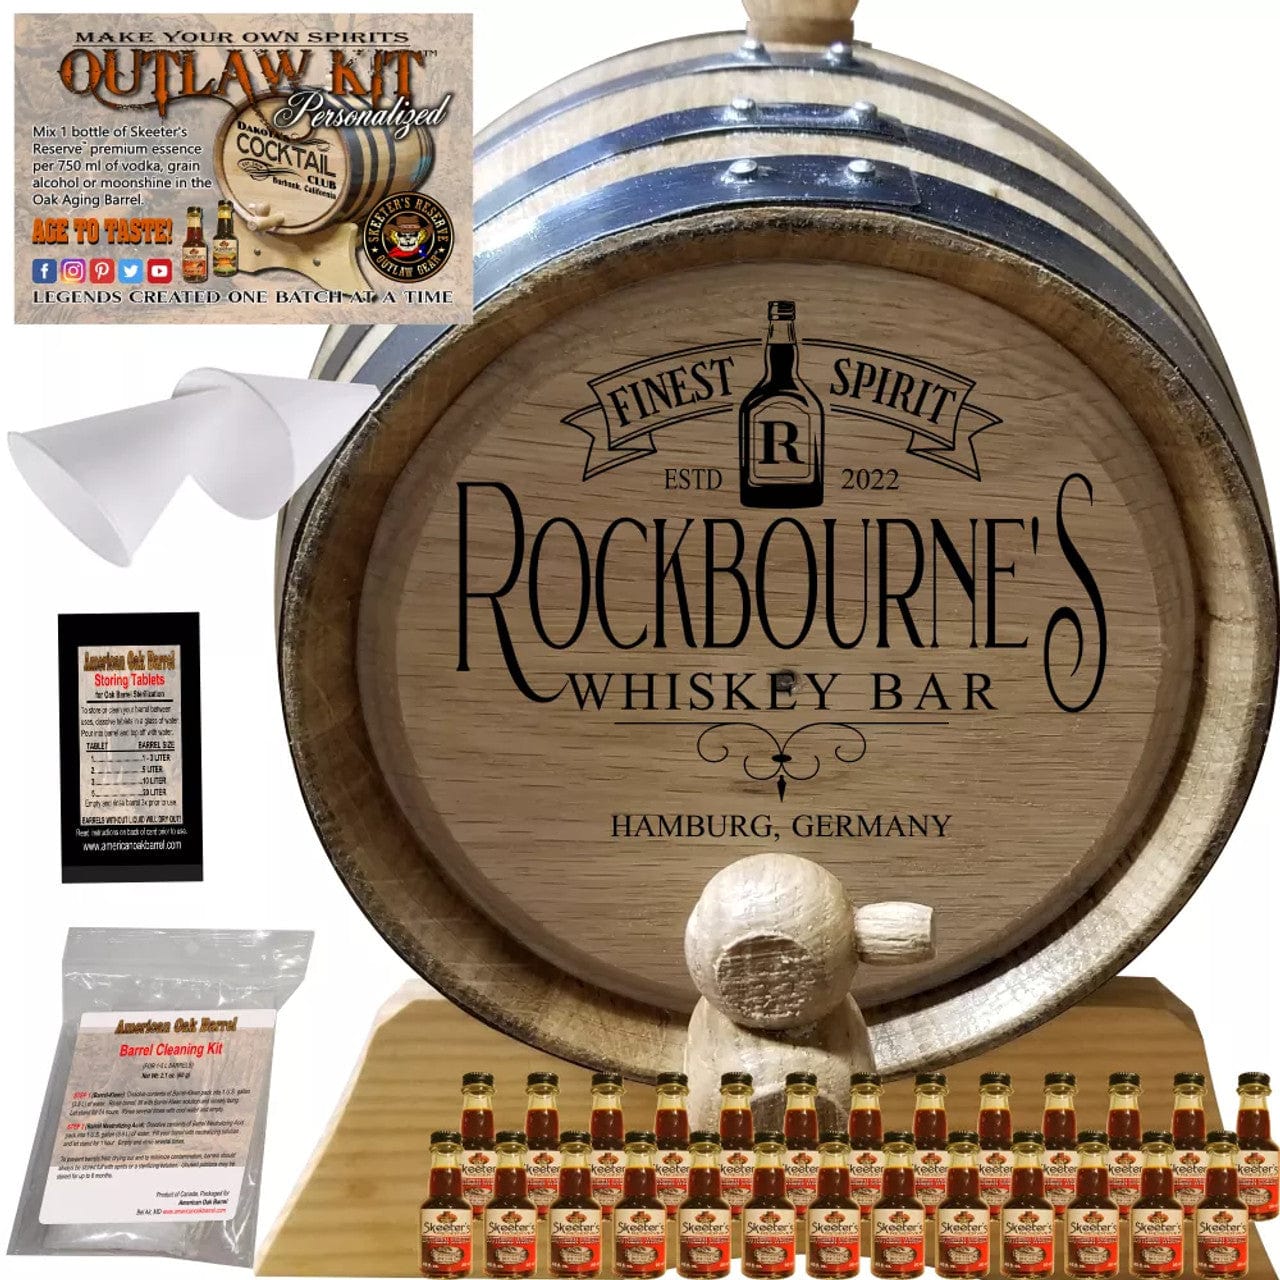 American Oak Barrel Engrave Barrels 1 Liter (.26 gallon) / Golden Tequila / None American Oak Barrel Personalized Outlaw Kit™ (213) My Whiskey Bar - Create Your Own Spirits in Golden Tequila